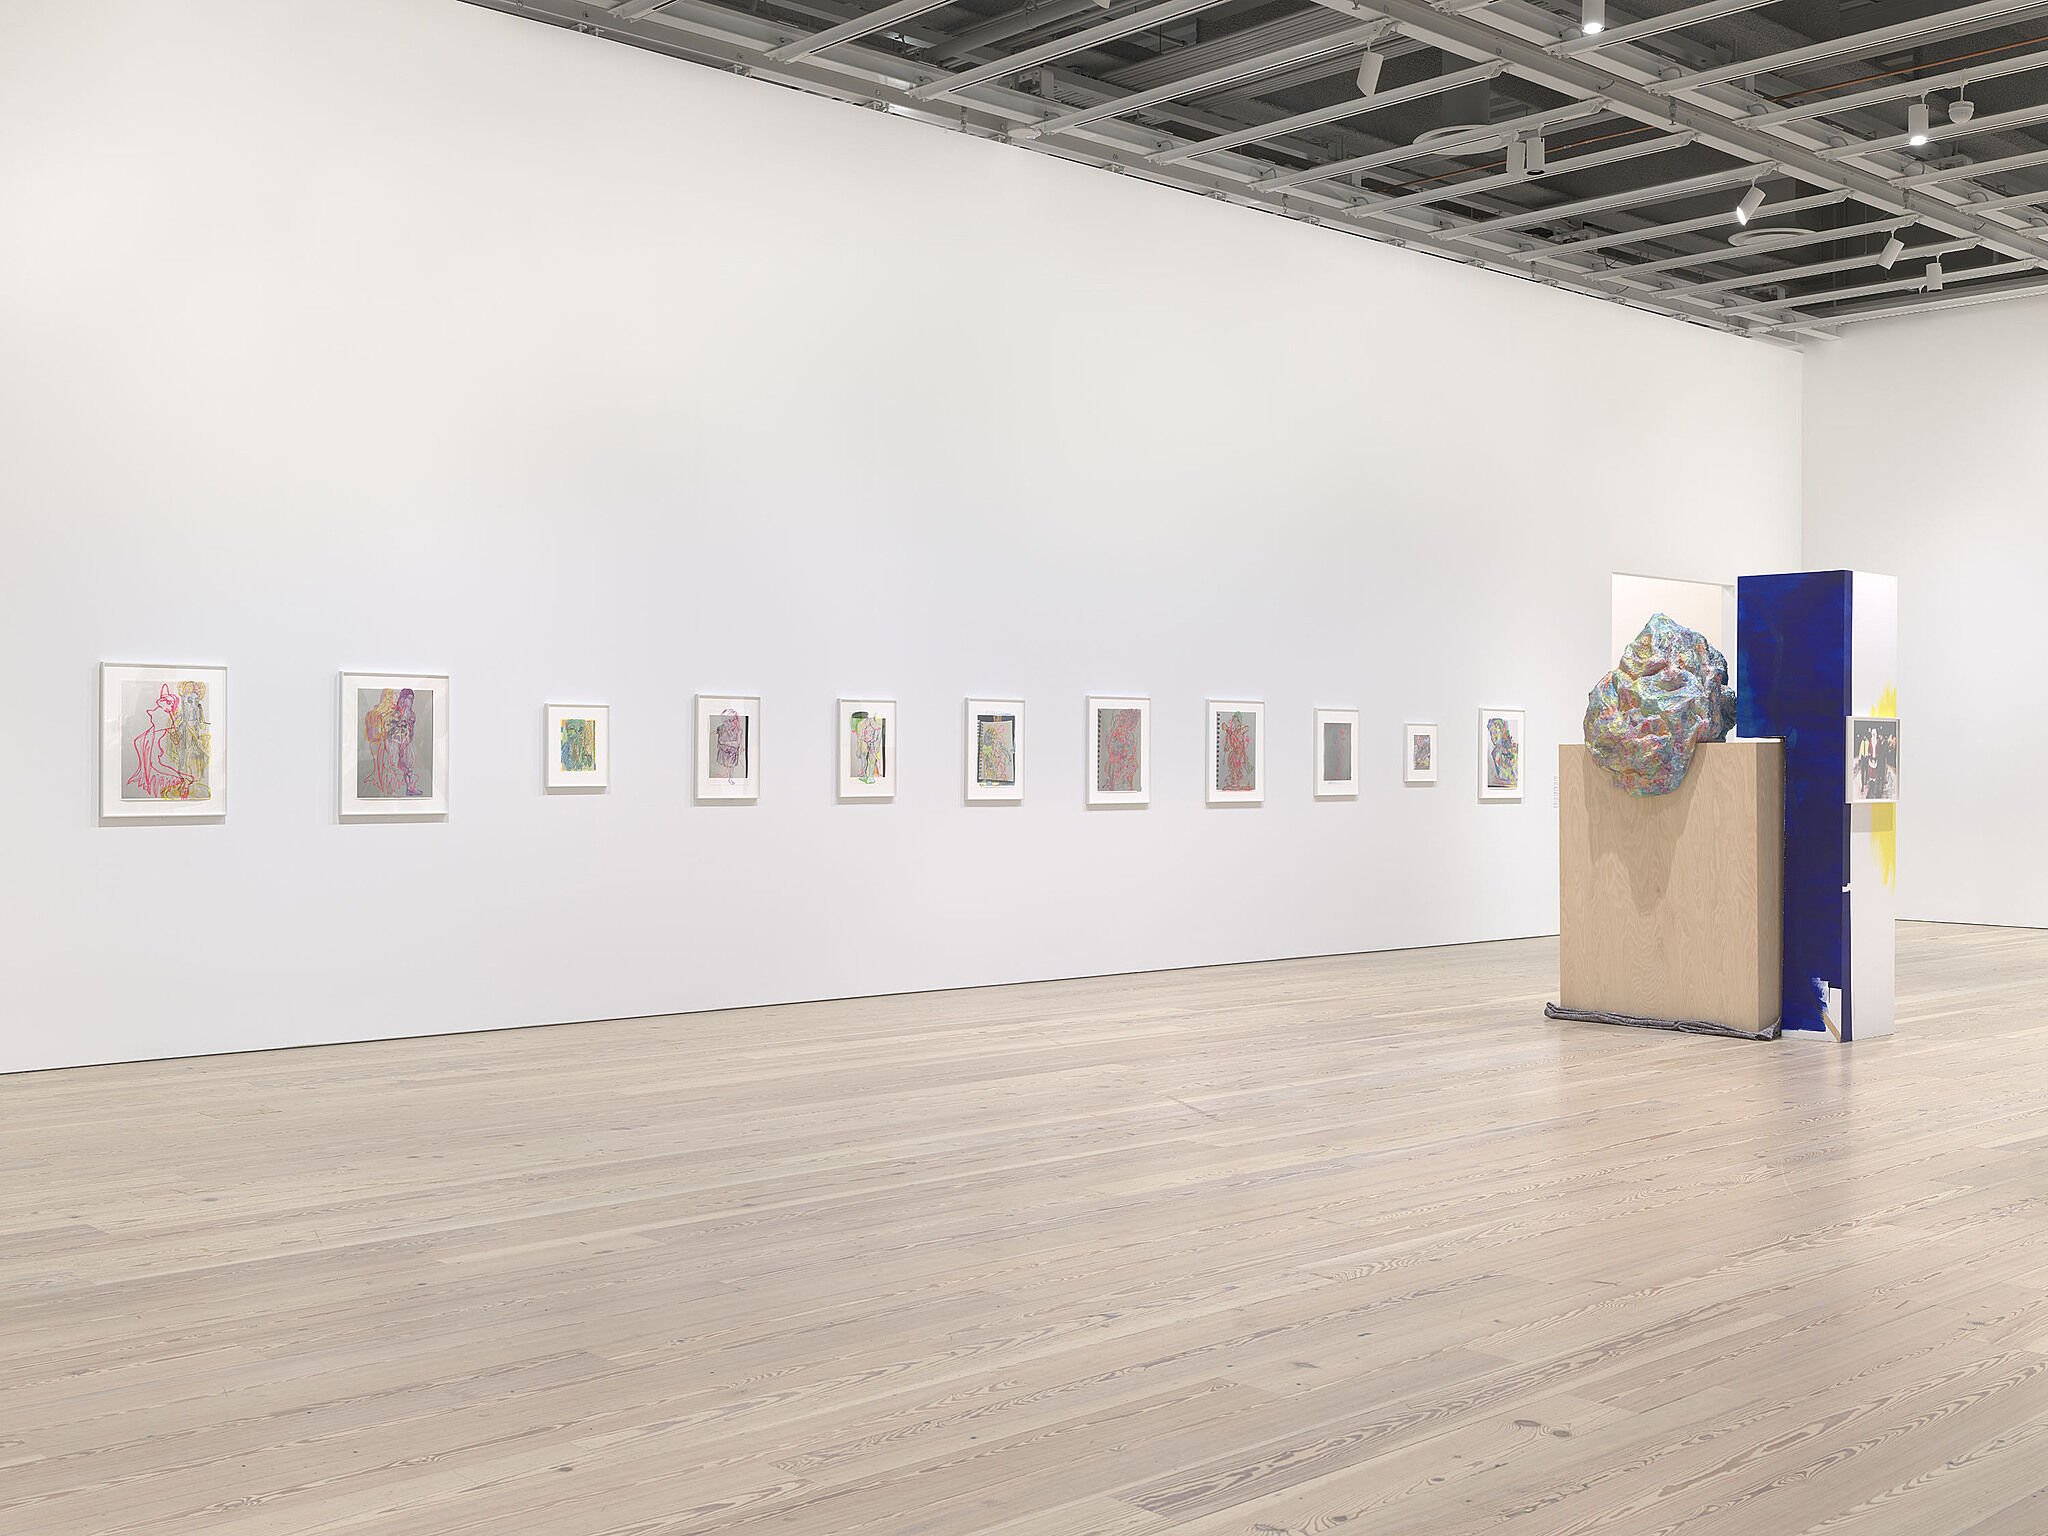 An image of the Whitney galleries with various sculptures and artworks on the walls.